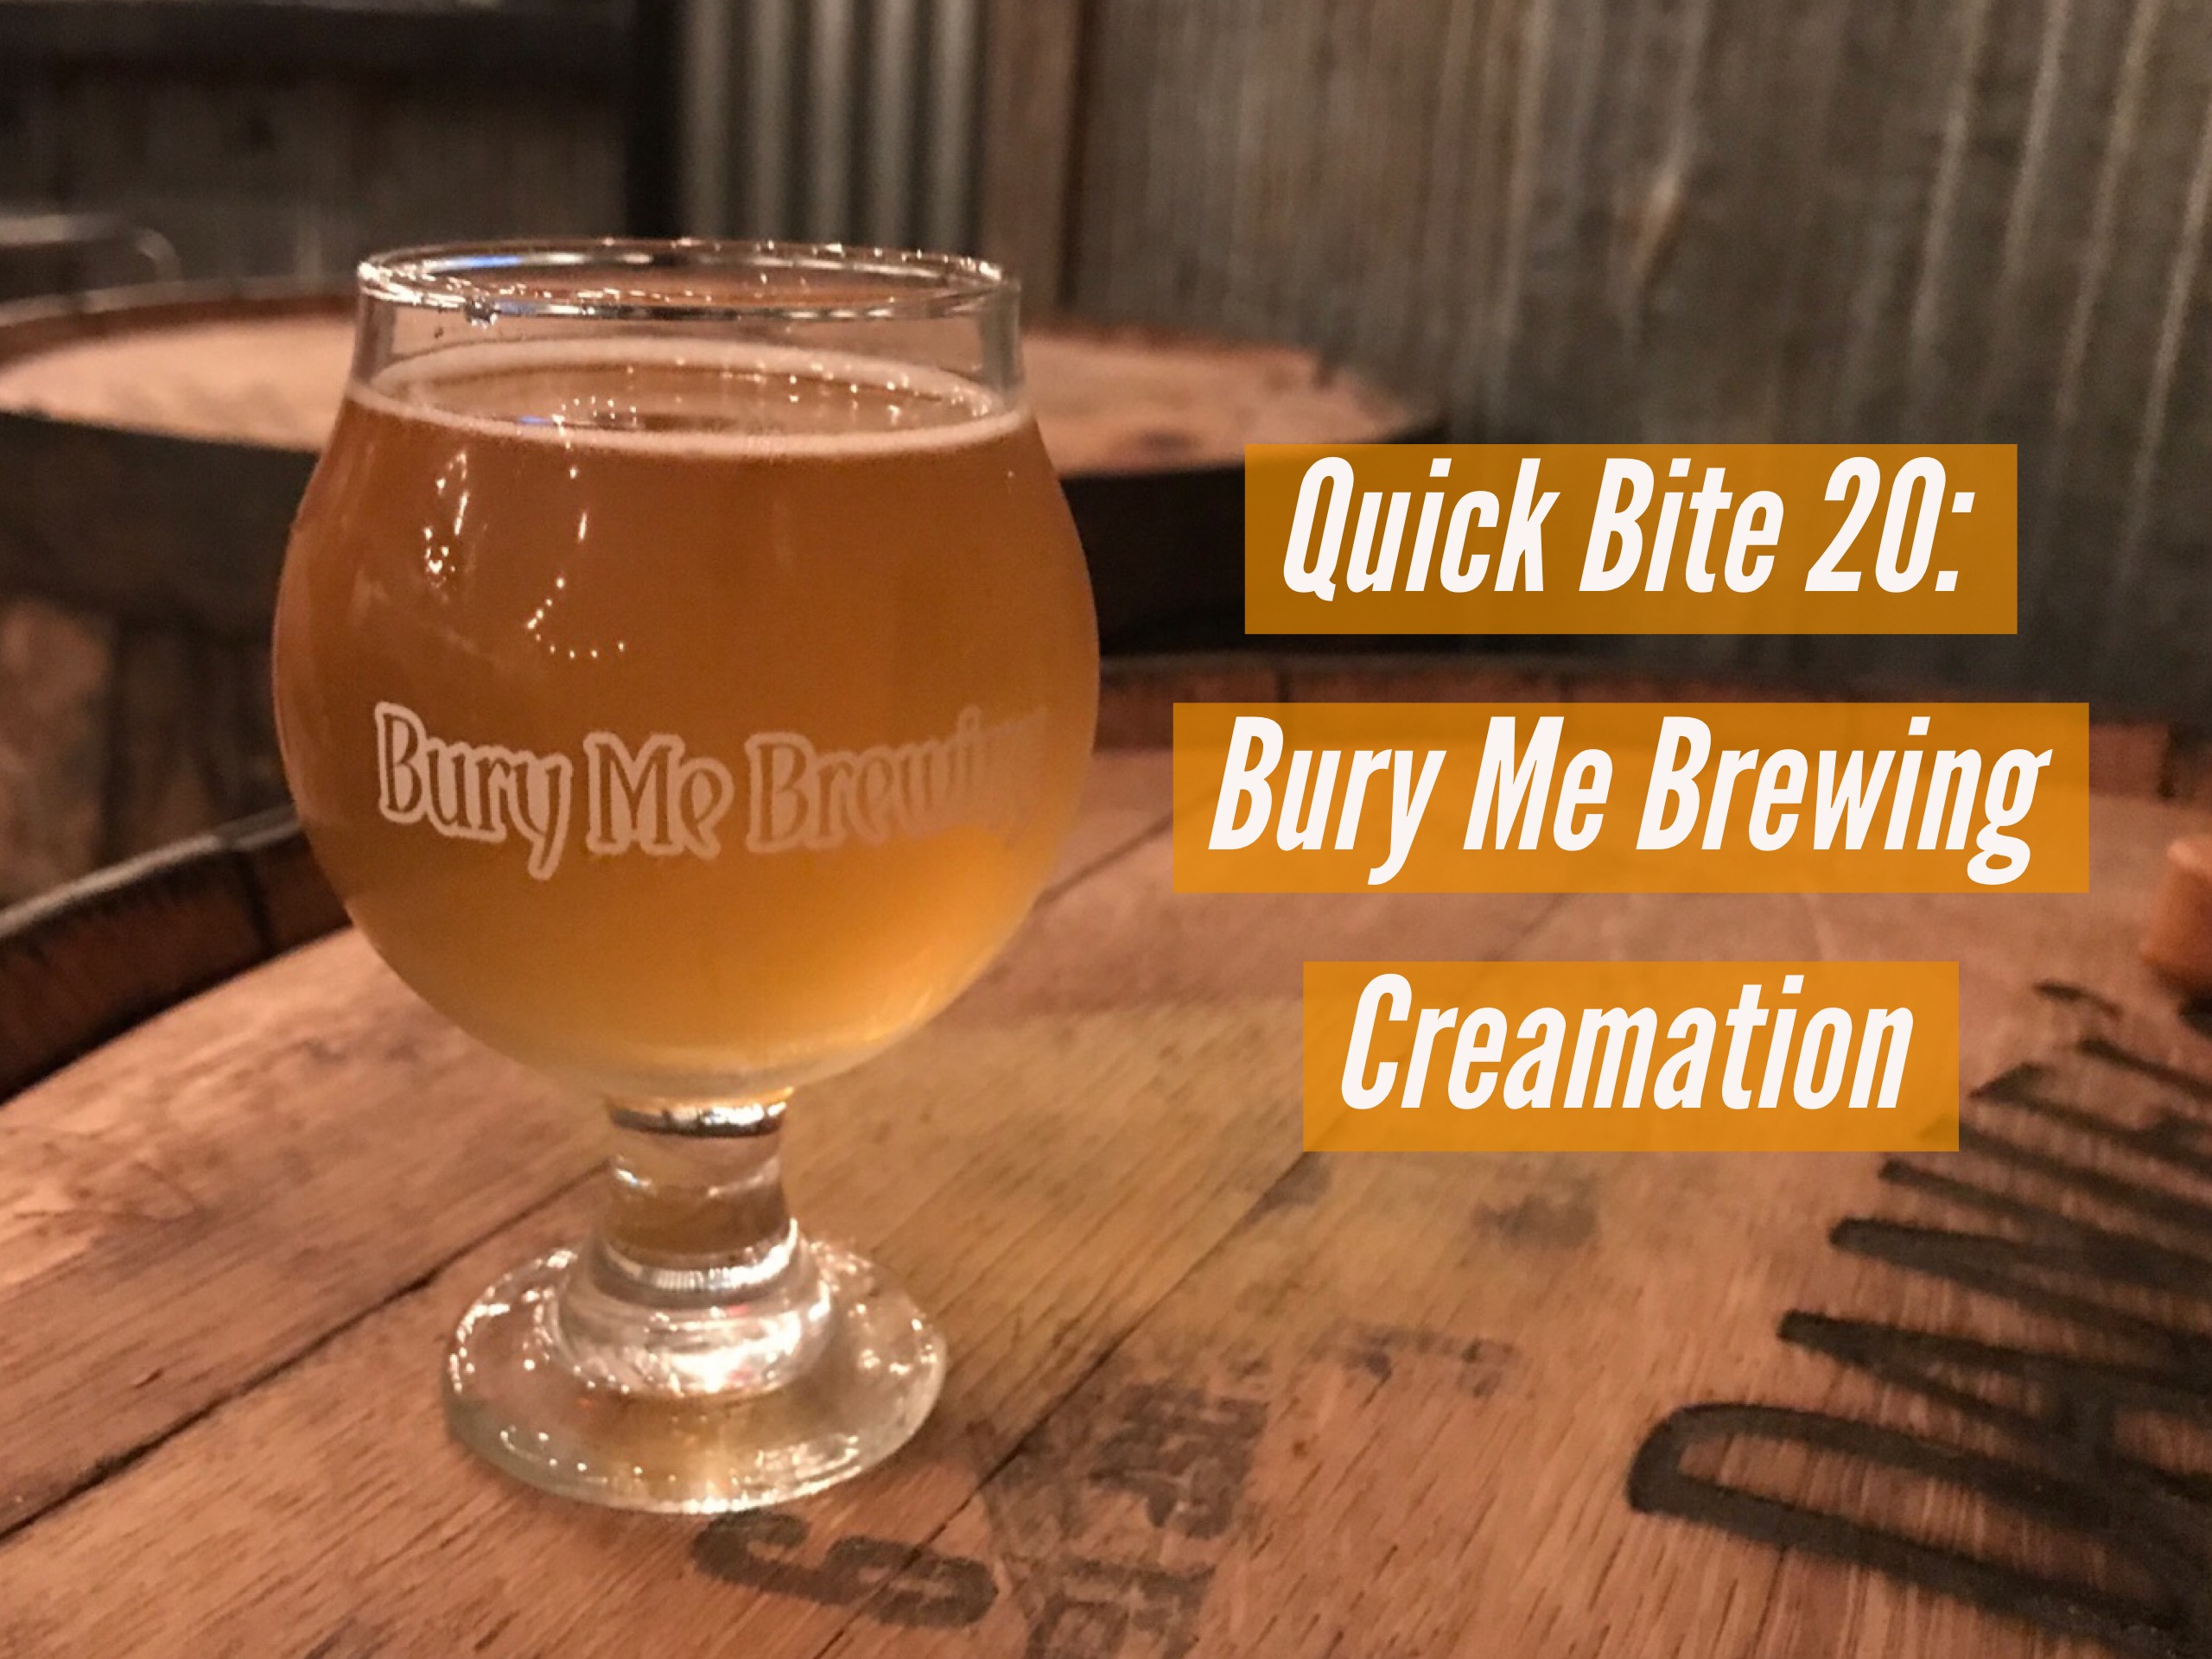 RED Quick Bite #20 Bury Me Brewing Creamation